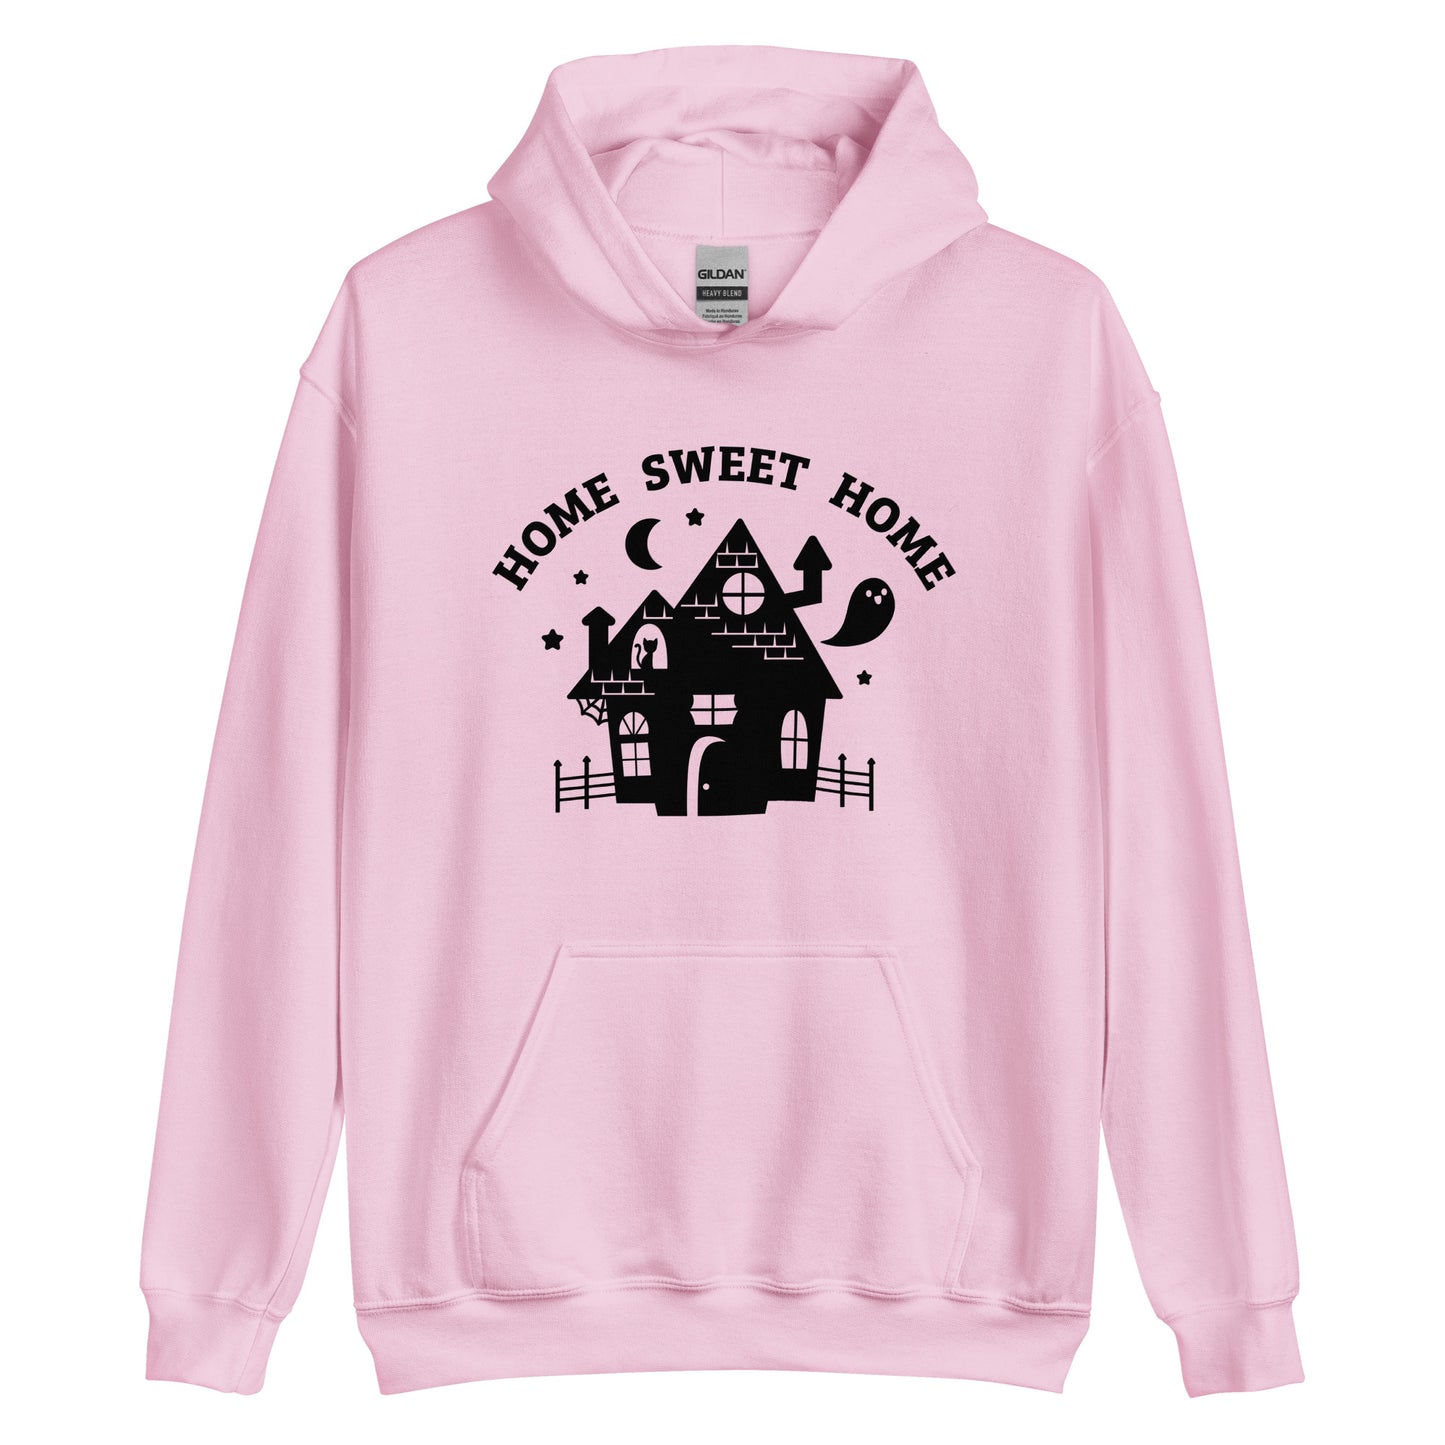 A pink hooded sweatshirt featuring a cutesy image of a haunted house. Text above the house reads "HOME SWEET HOME"